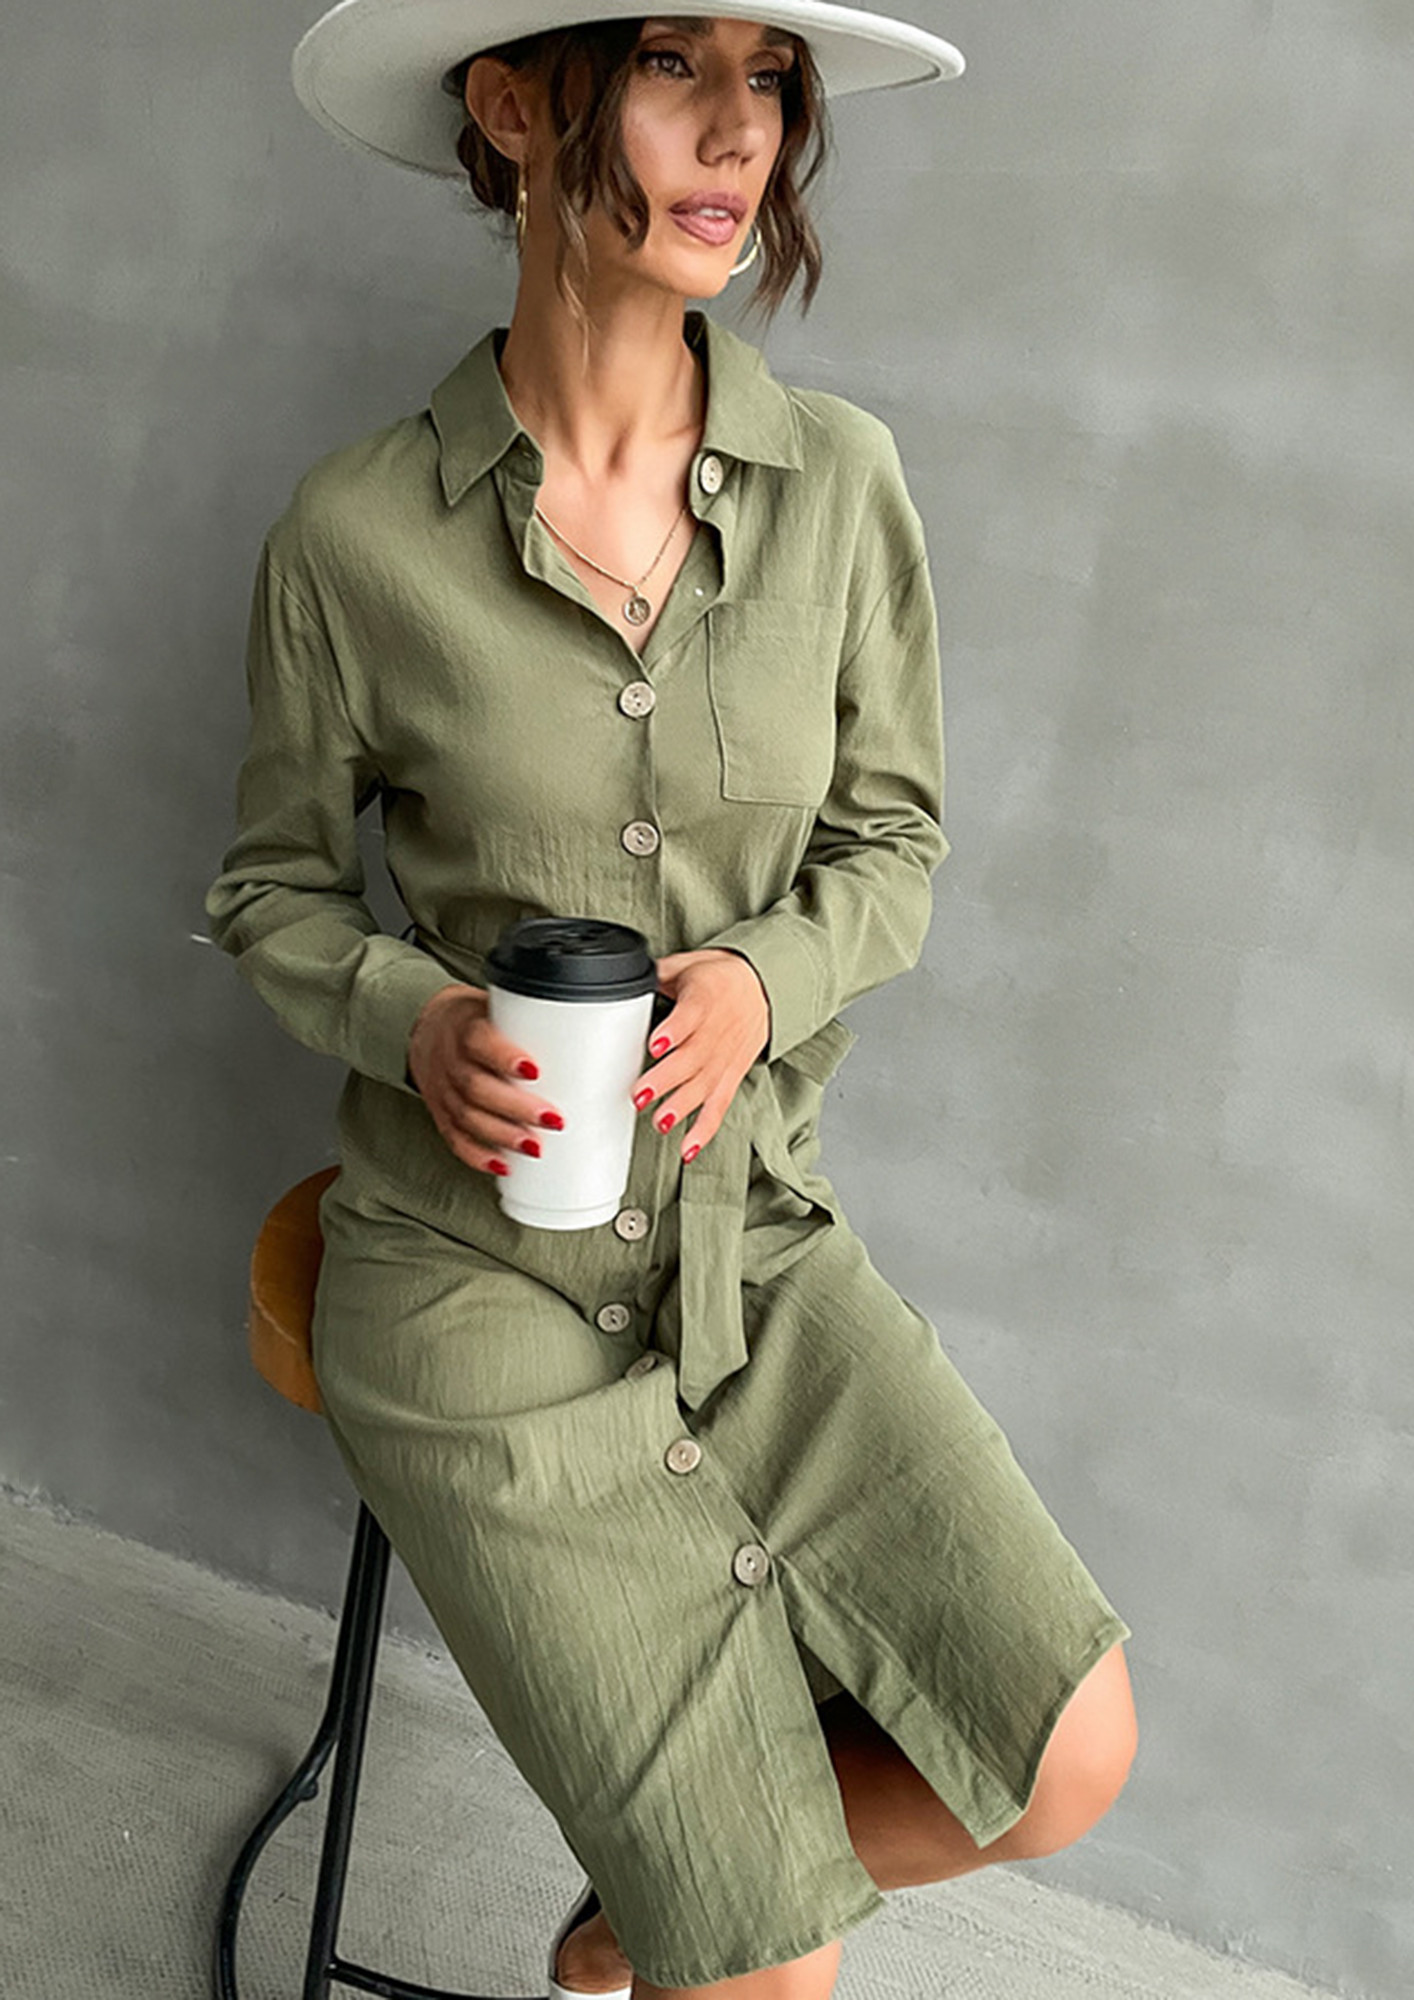 Simply Cute T-Shirt Dress - Army Green - The Mariqua D'Shay Collection